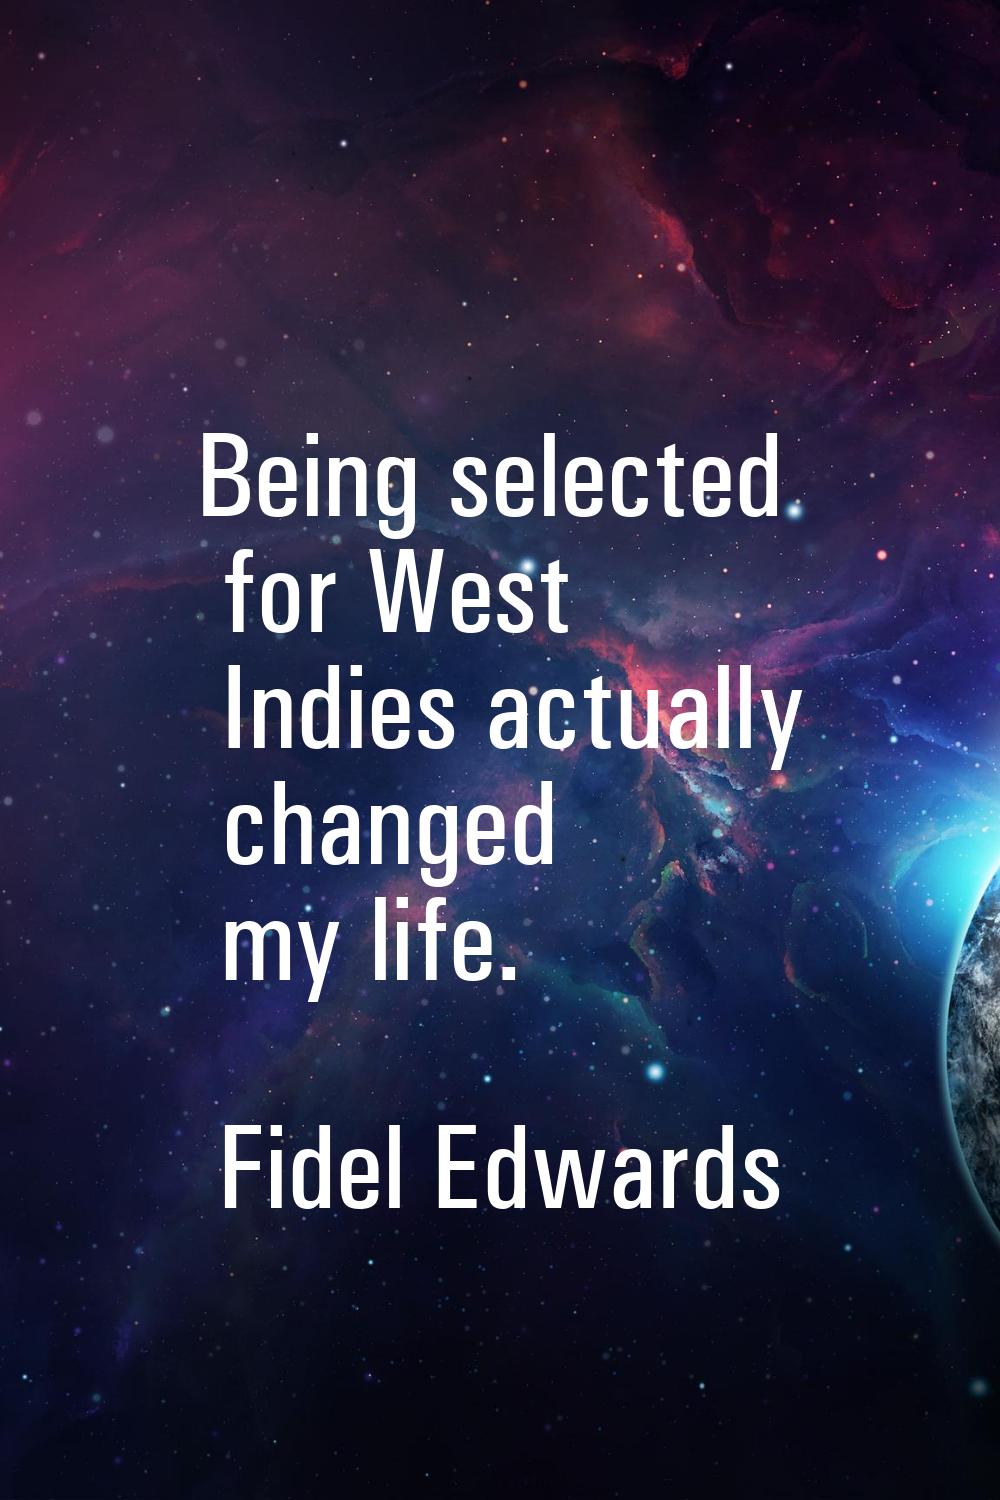 Being selected for West Indies actually changed my life.